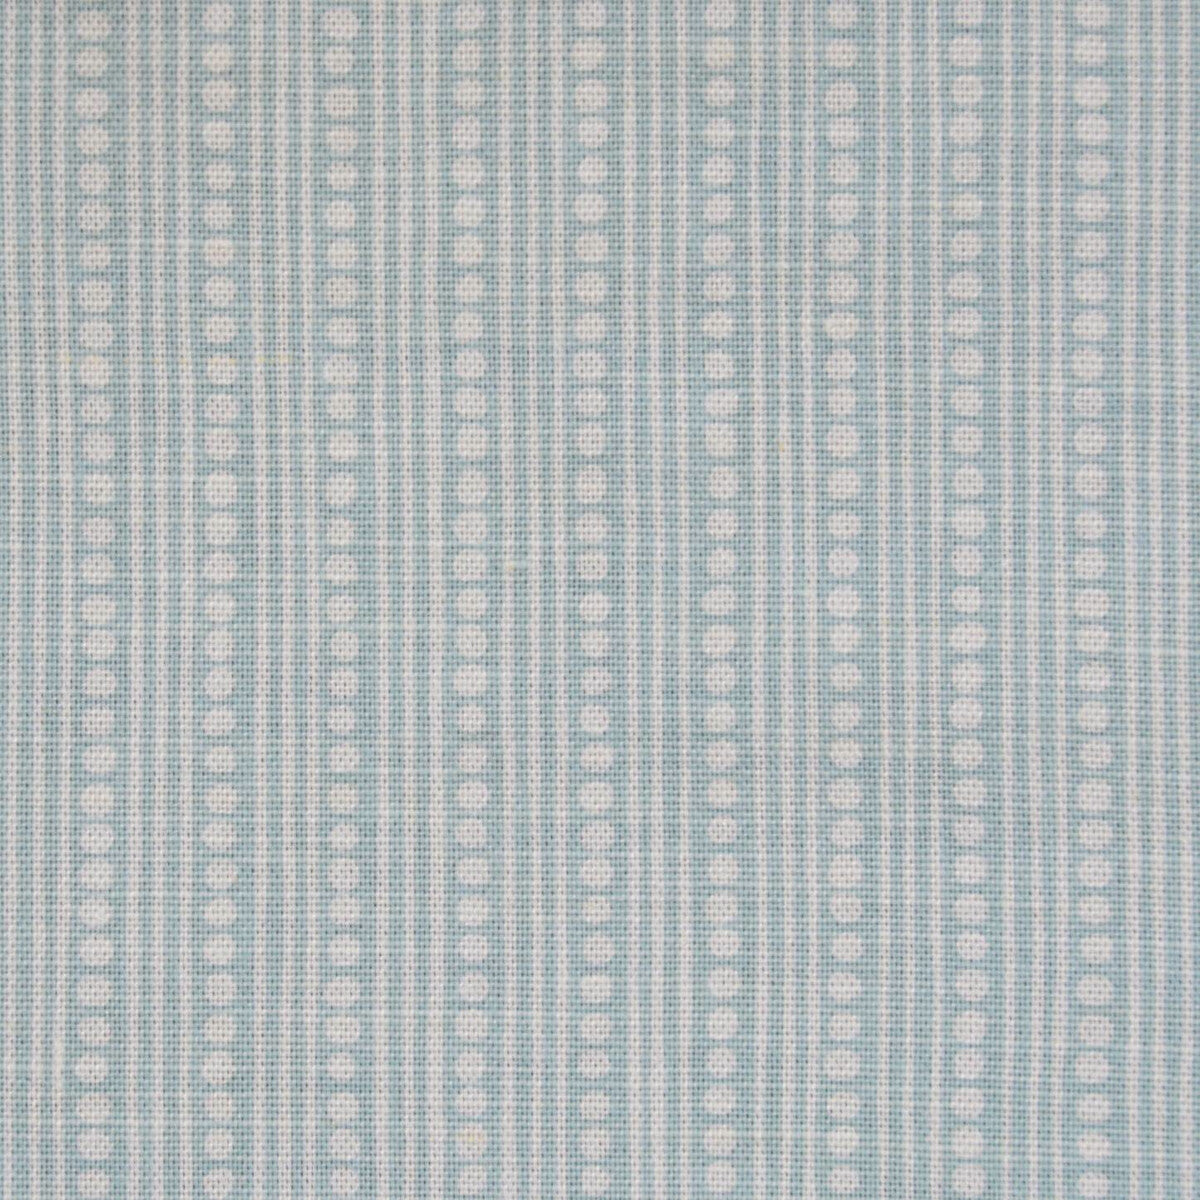 Wicklewood II fabric in aqua color - pattern BFC-3539.13.0 - by Lee Jofa in the Blithfield collection